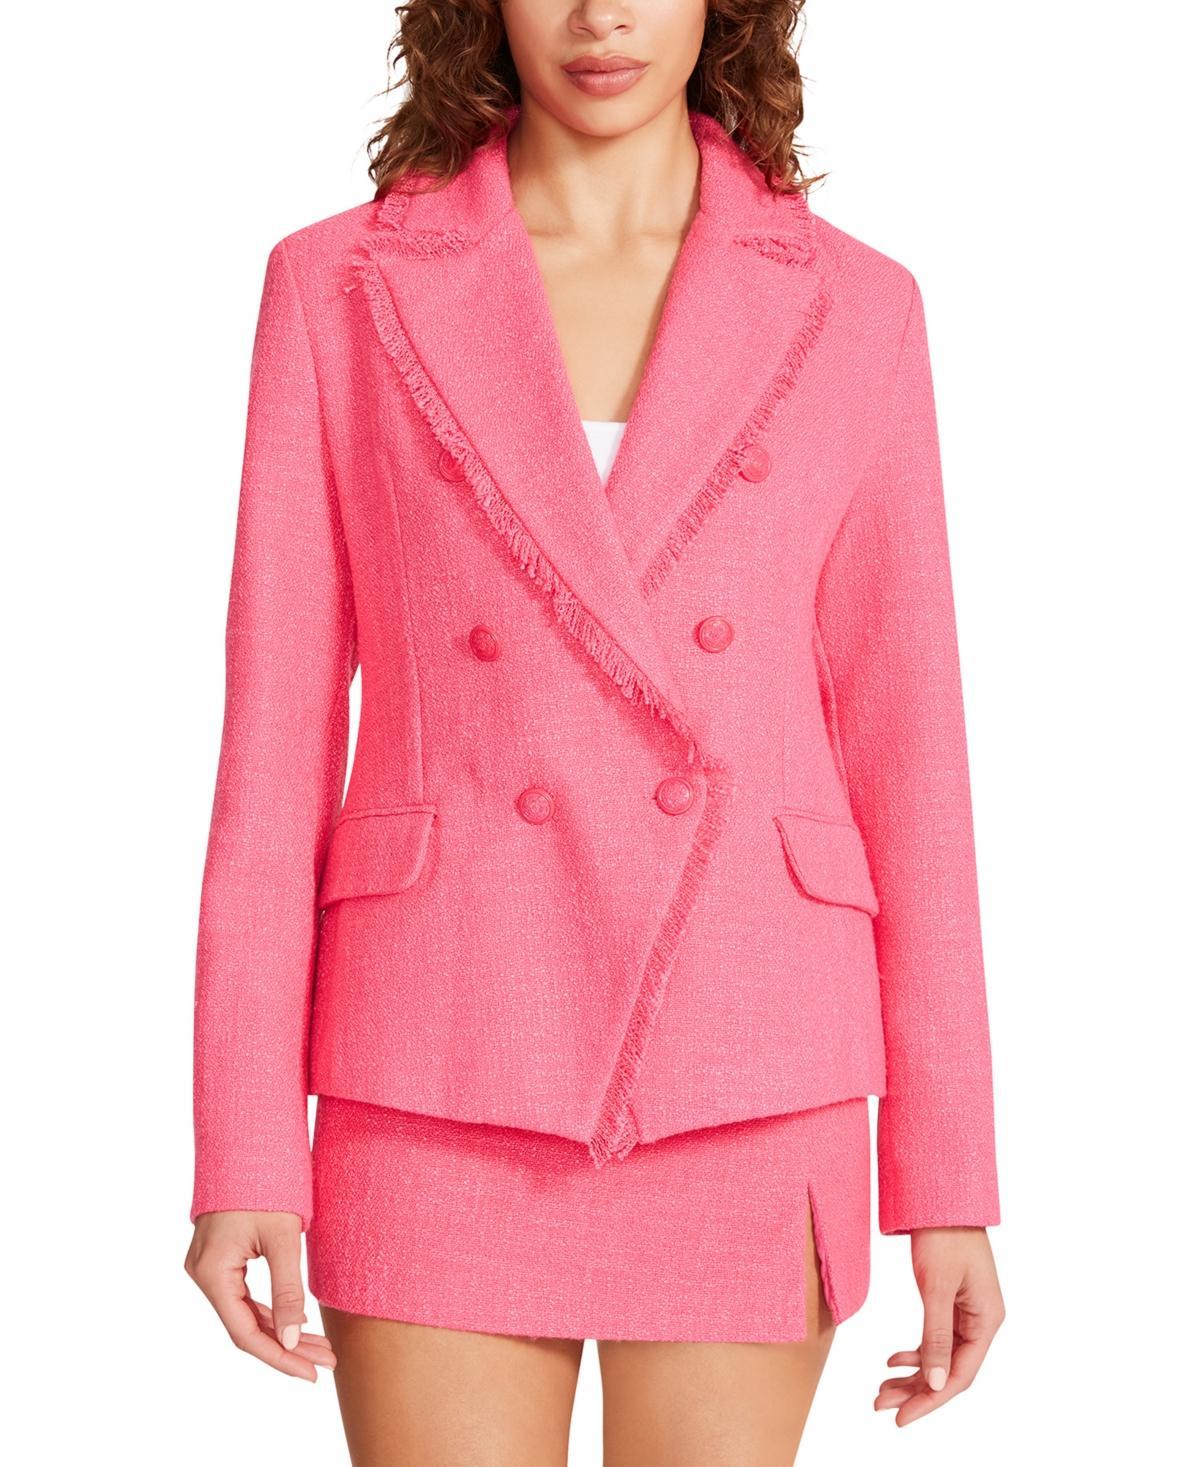 Steve Madden Naomi Double Breasted Tweed Blazer Product Image